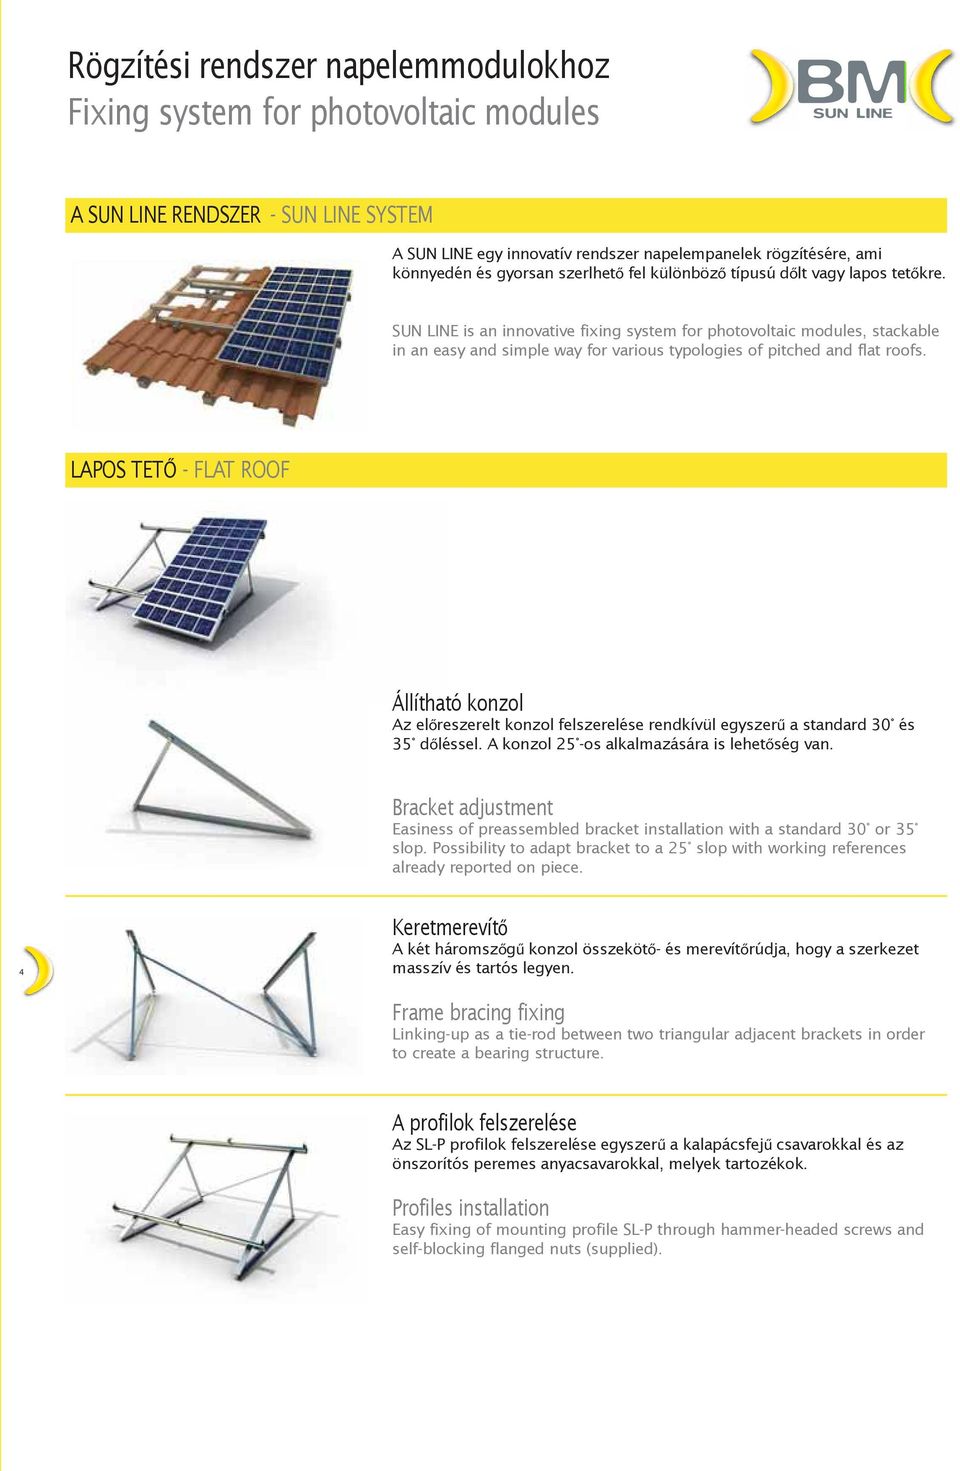 SUN LINE is an innovative fixing system for photovoltaic modules, stackable in an easy and simple way for various typologies of pitched and flat roofs.